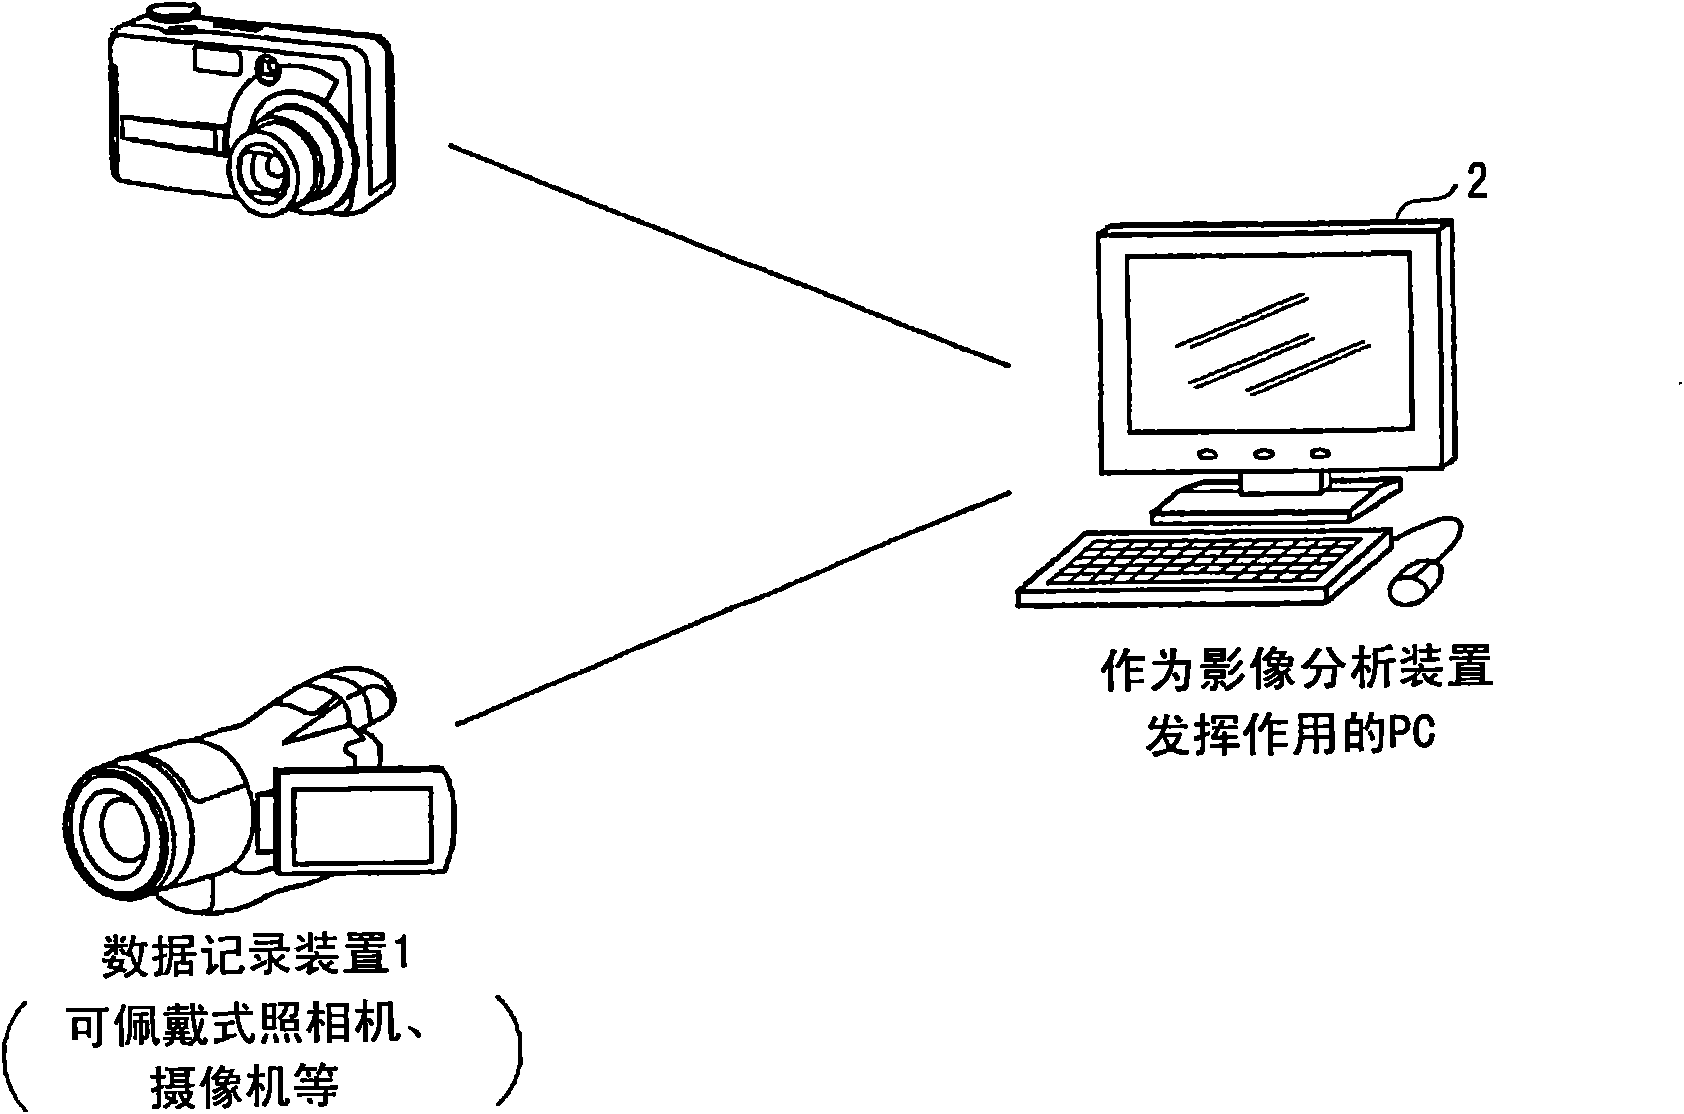 Video analysis apparatus and method for calculating inter-person evaluation value using video analysis